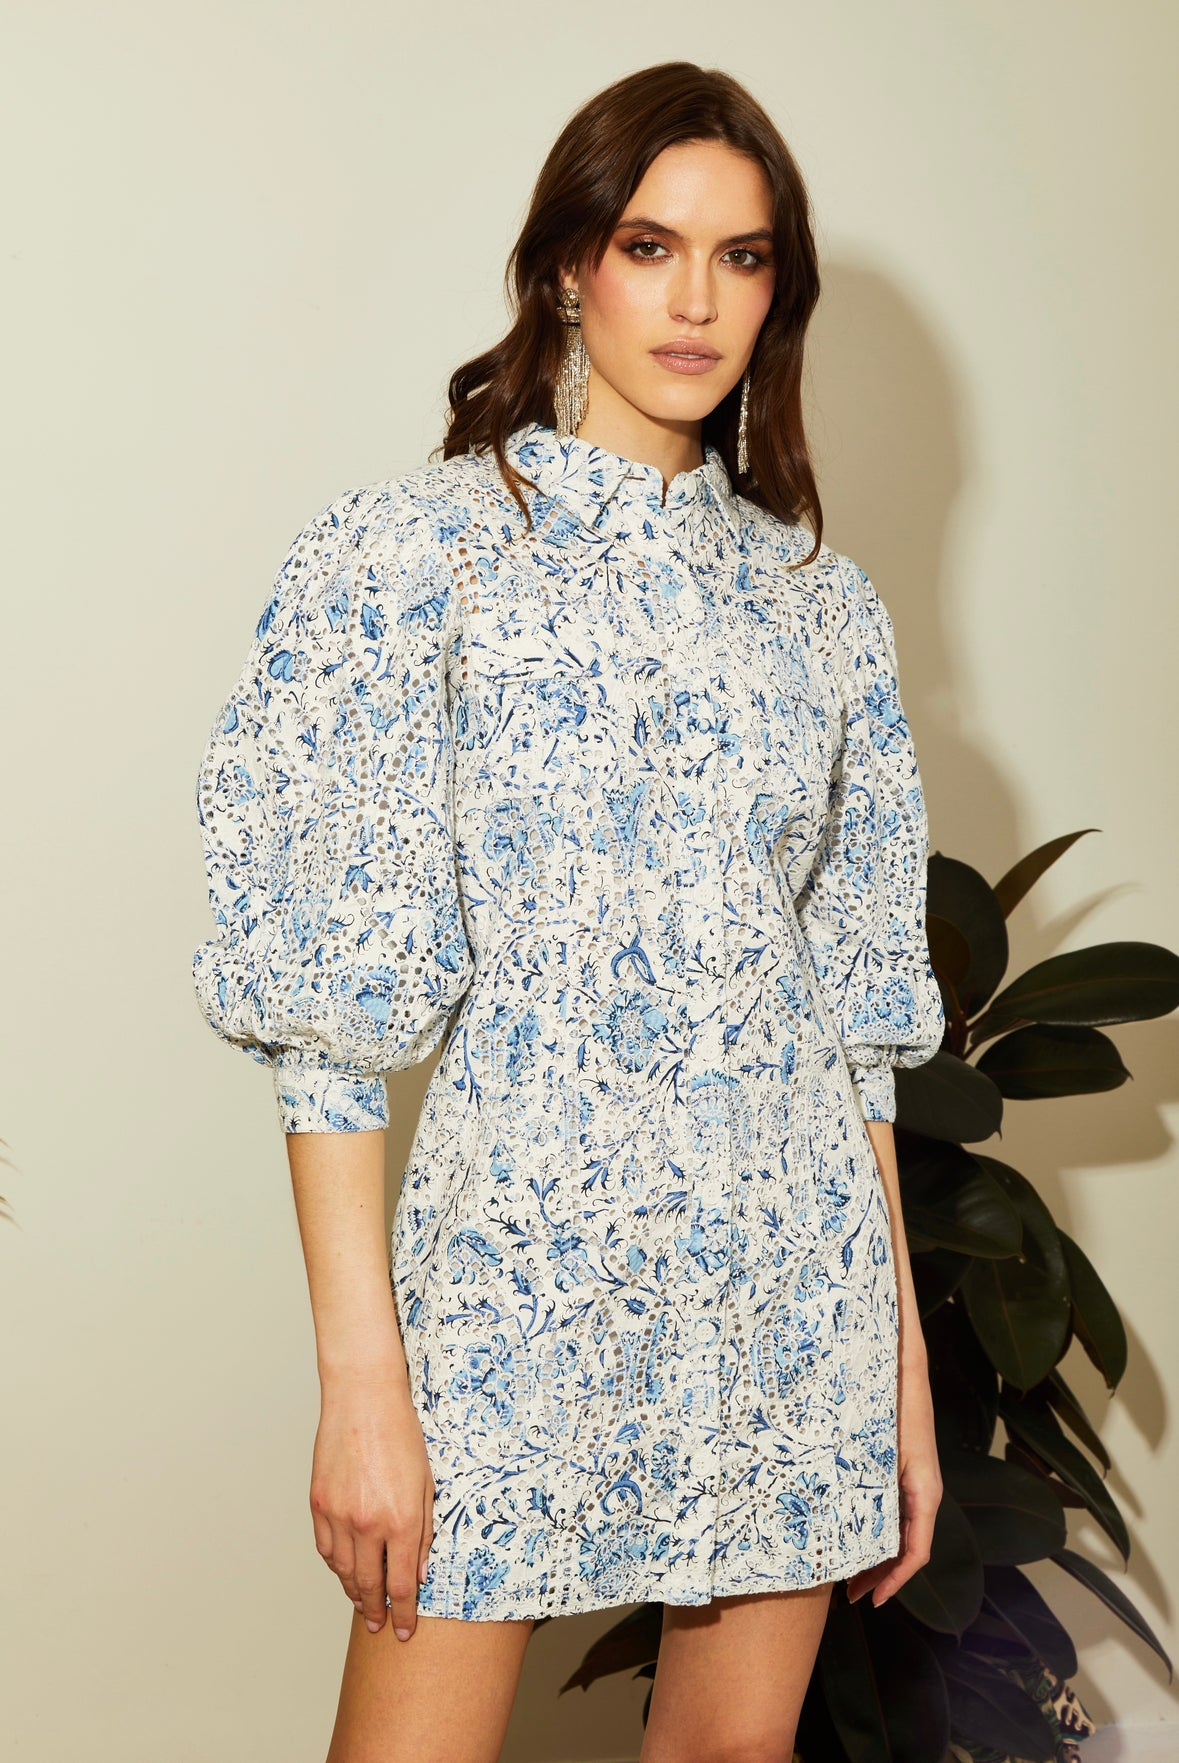 Lorna Luxe, Dresses, Nwt Lorna Luxe X In The Style Dress